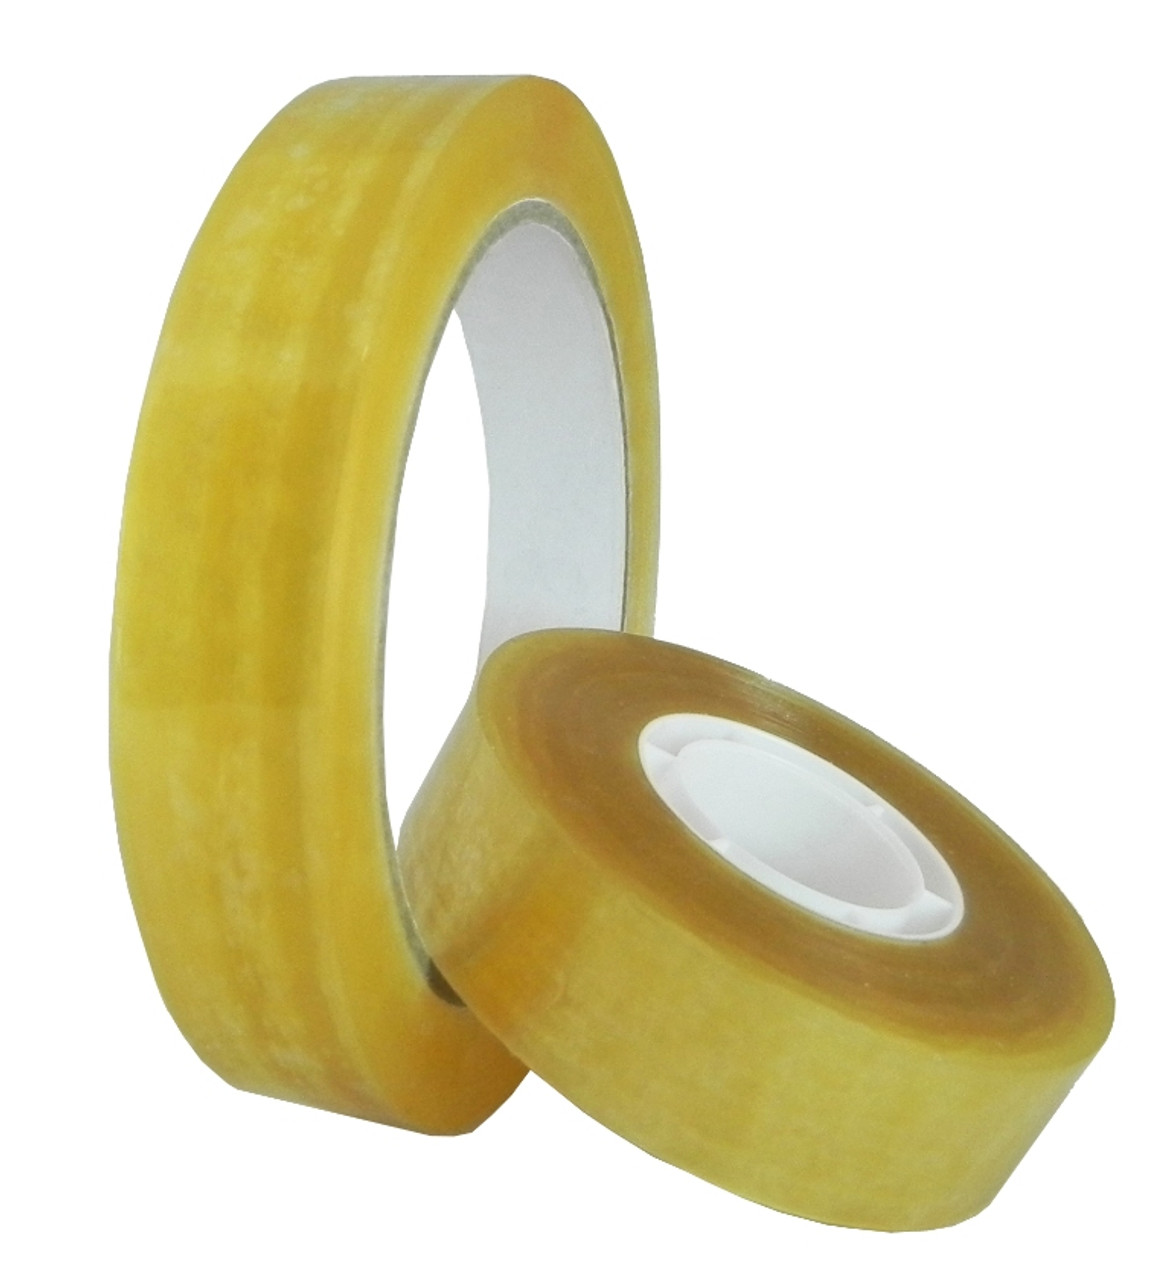 Office Warehouse Celo Tape 18mmx20m Yellow 3s